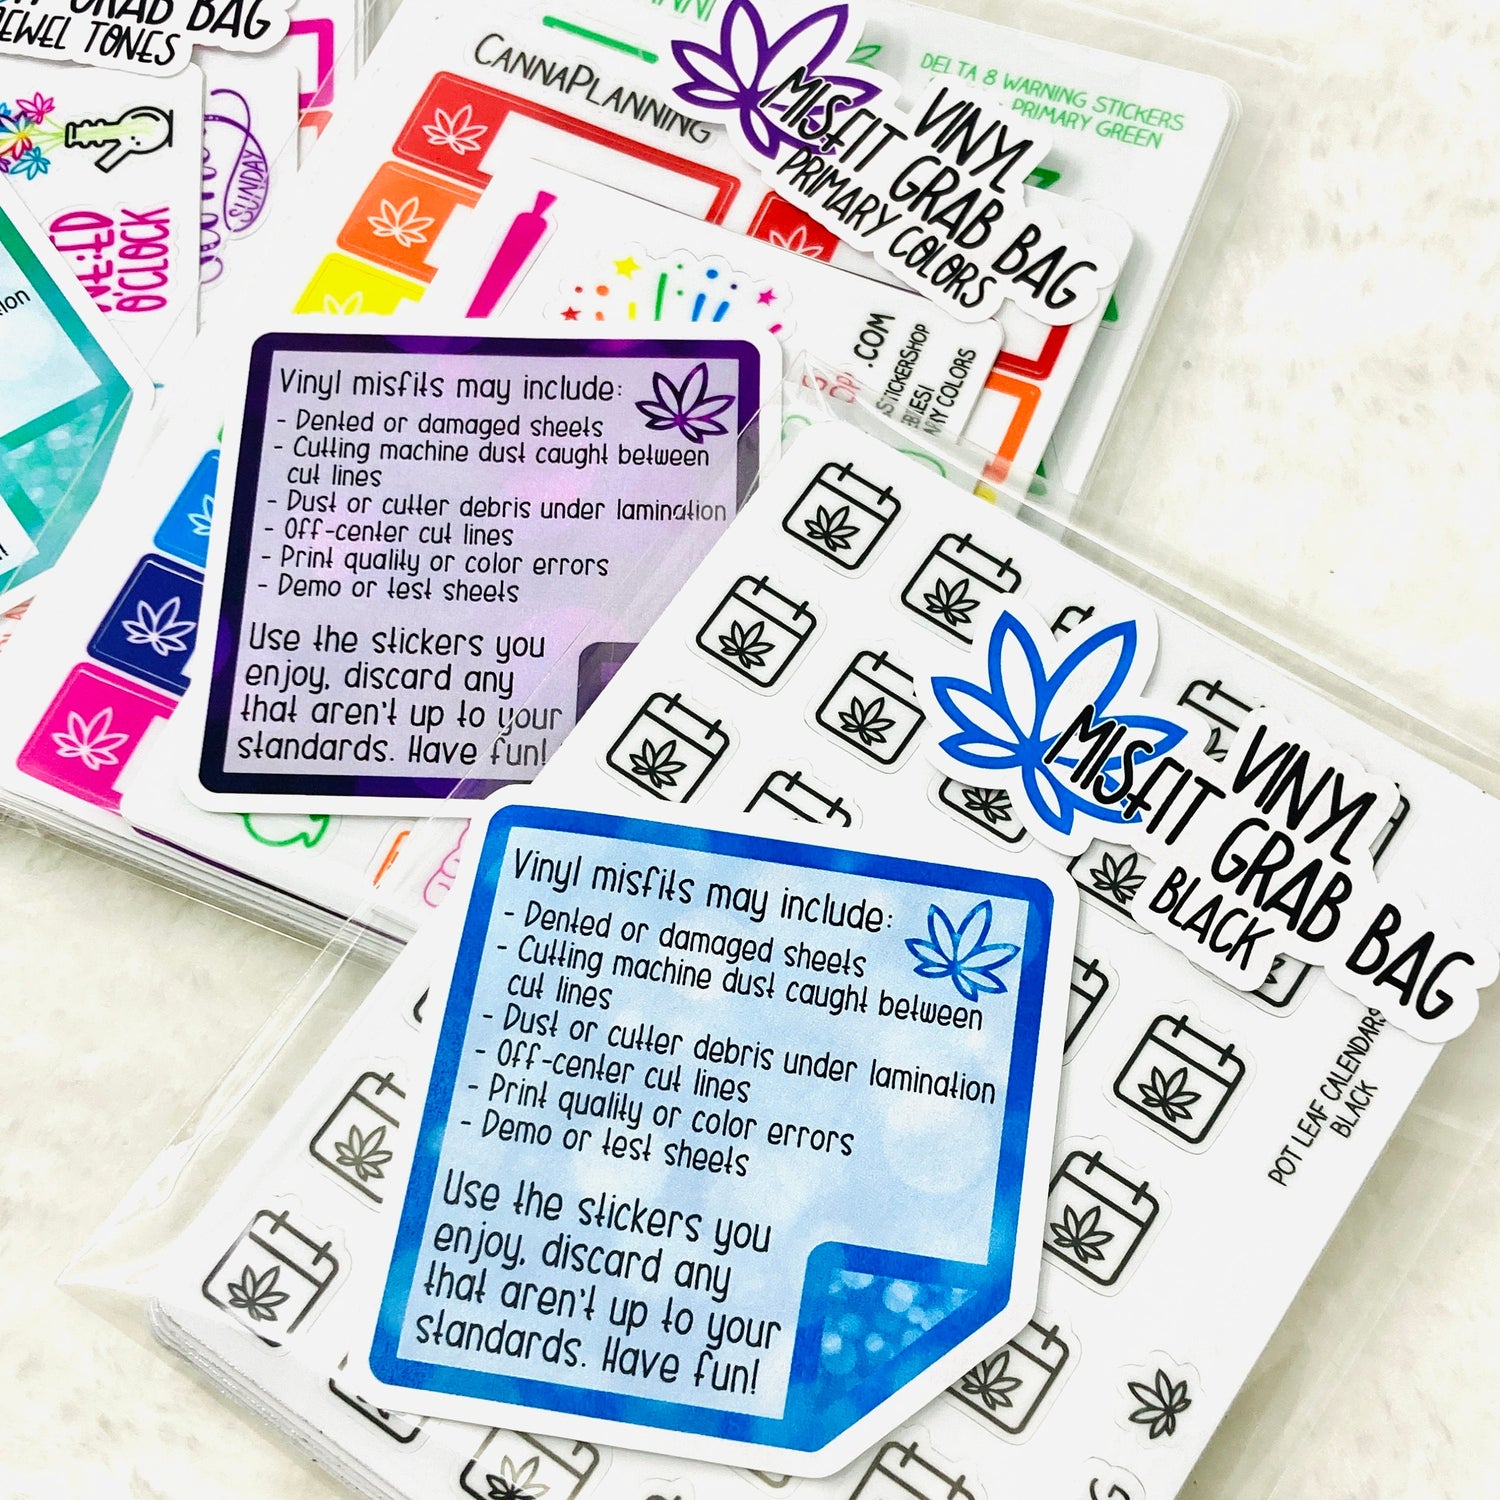 Mini VINYL Misfit Sticker Grab Bags - Weedy icon, lettering, warning and functional stickers | Cannabis 420 planner mystery random stickers